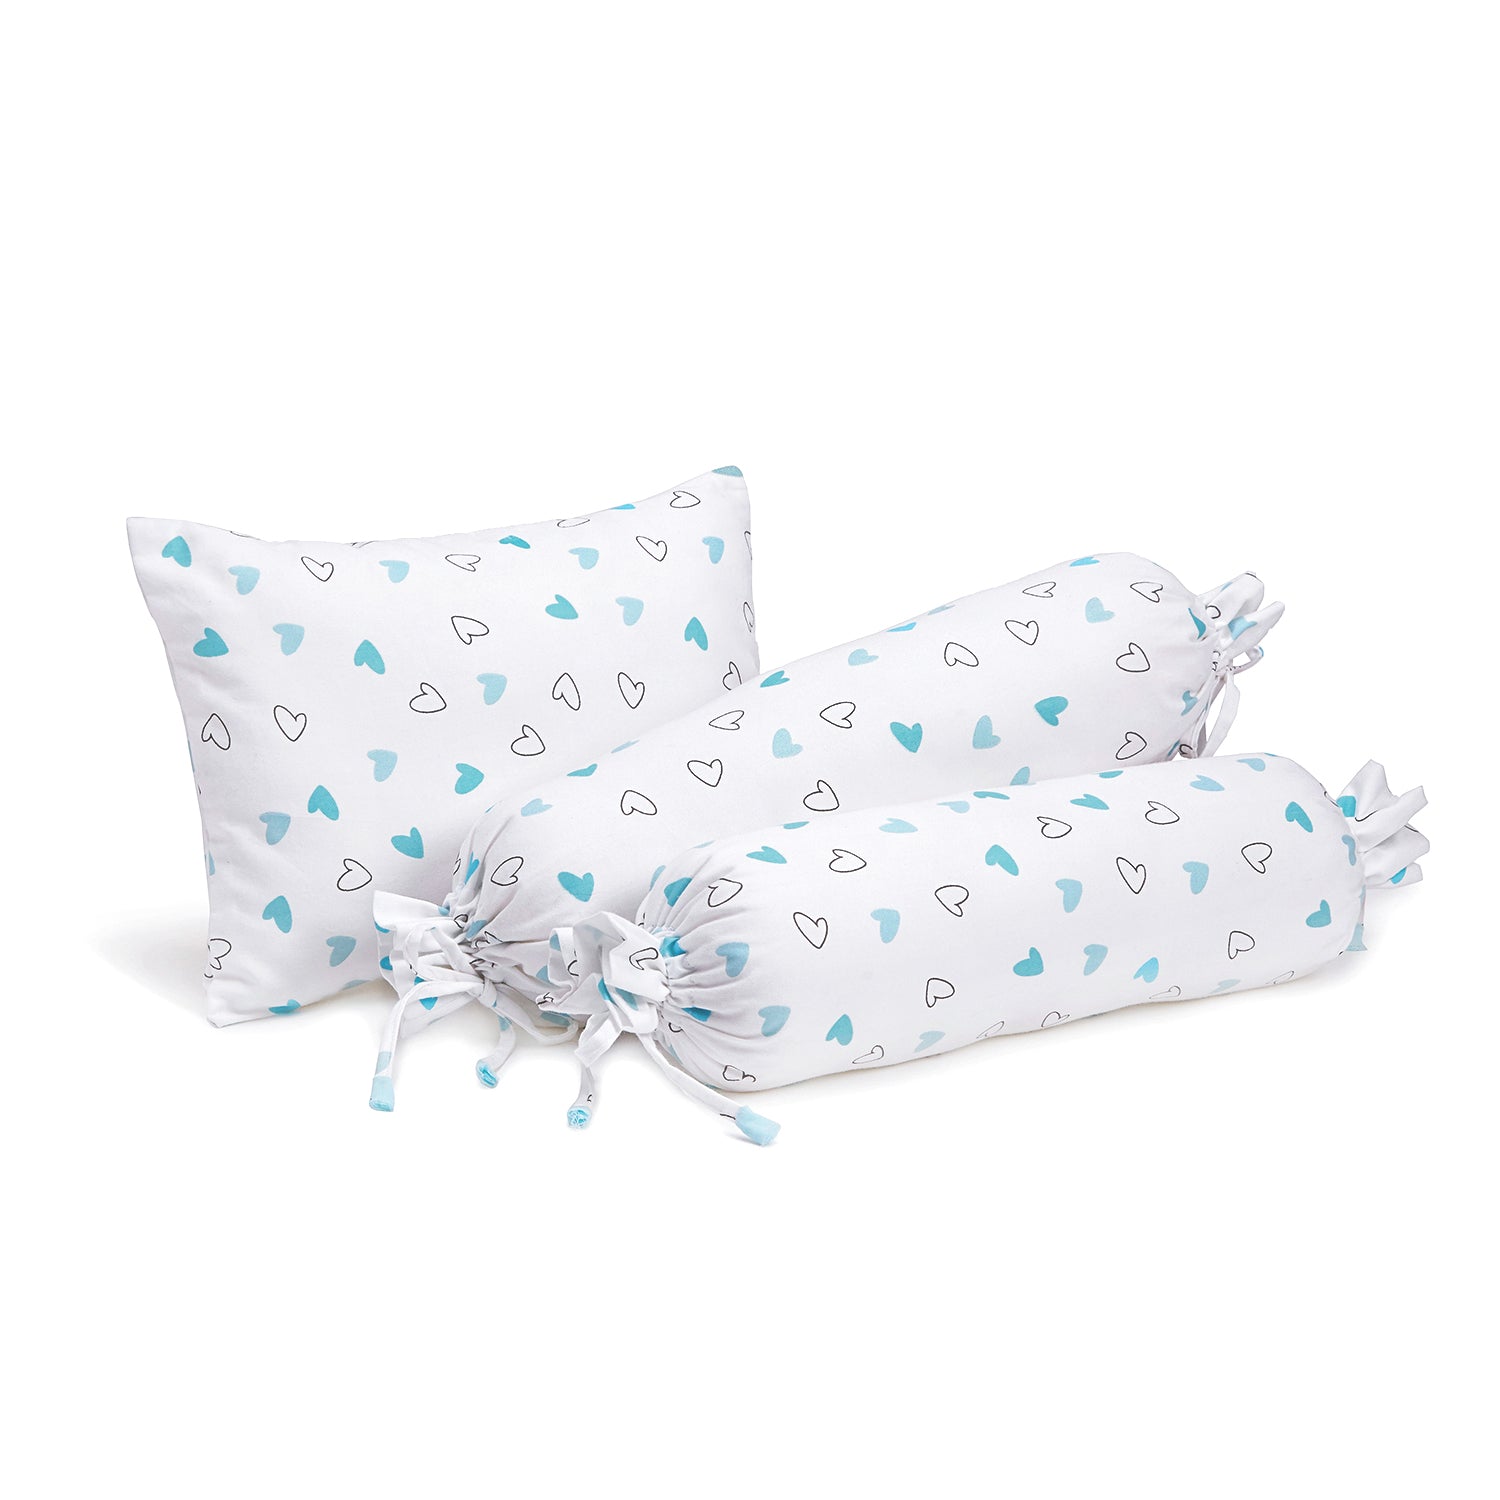 The White Cradle Cot Pillow + 2 Bolsters Set with Fillers - Blue Hearts